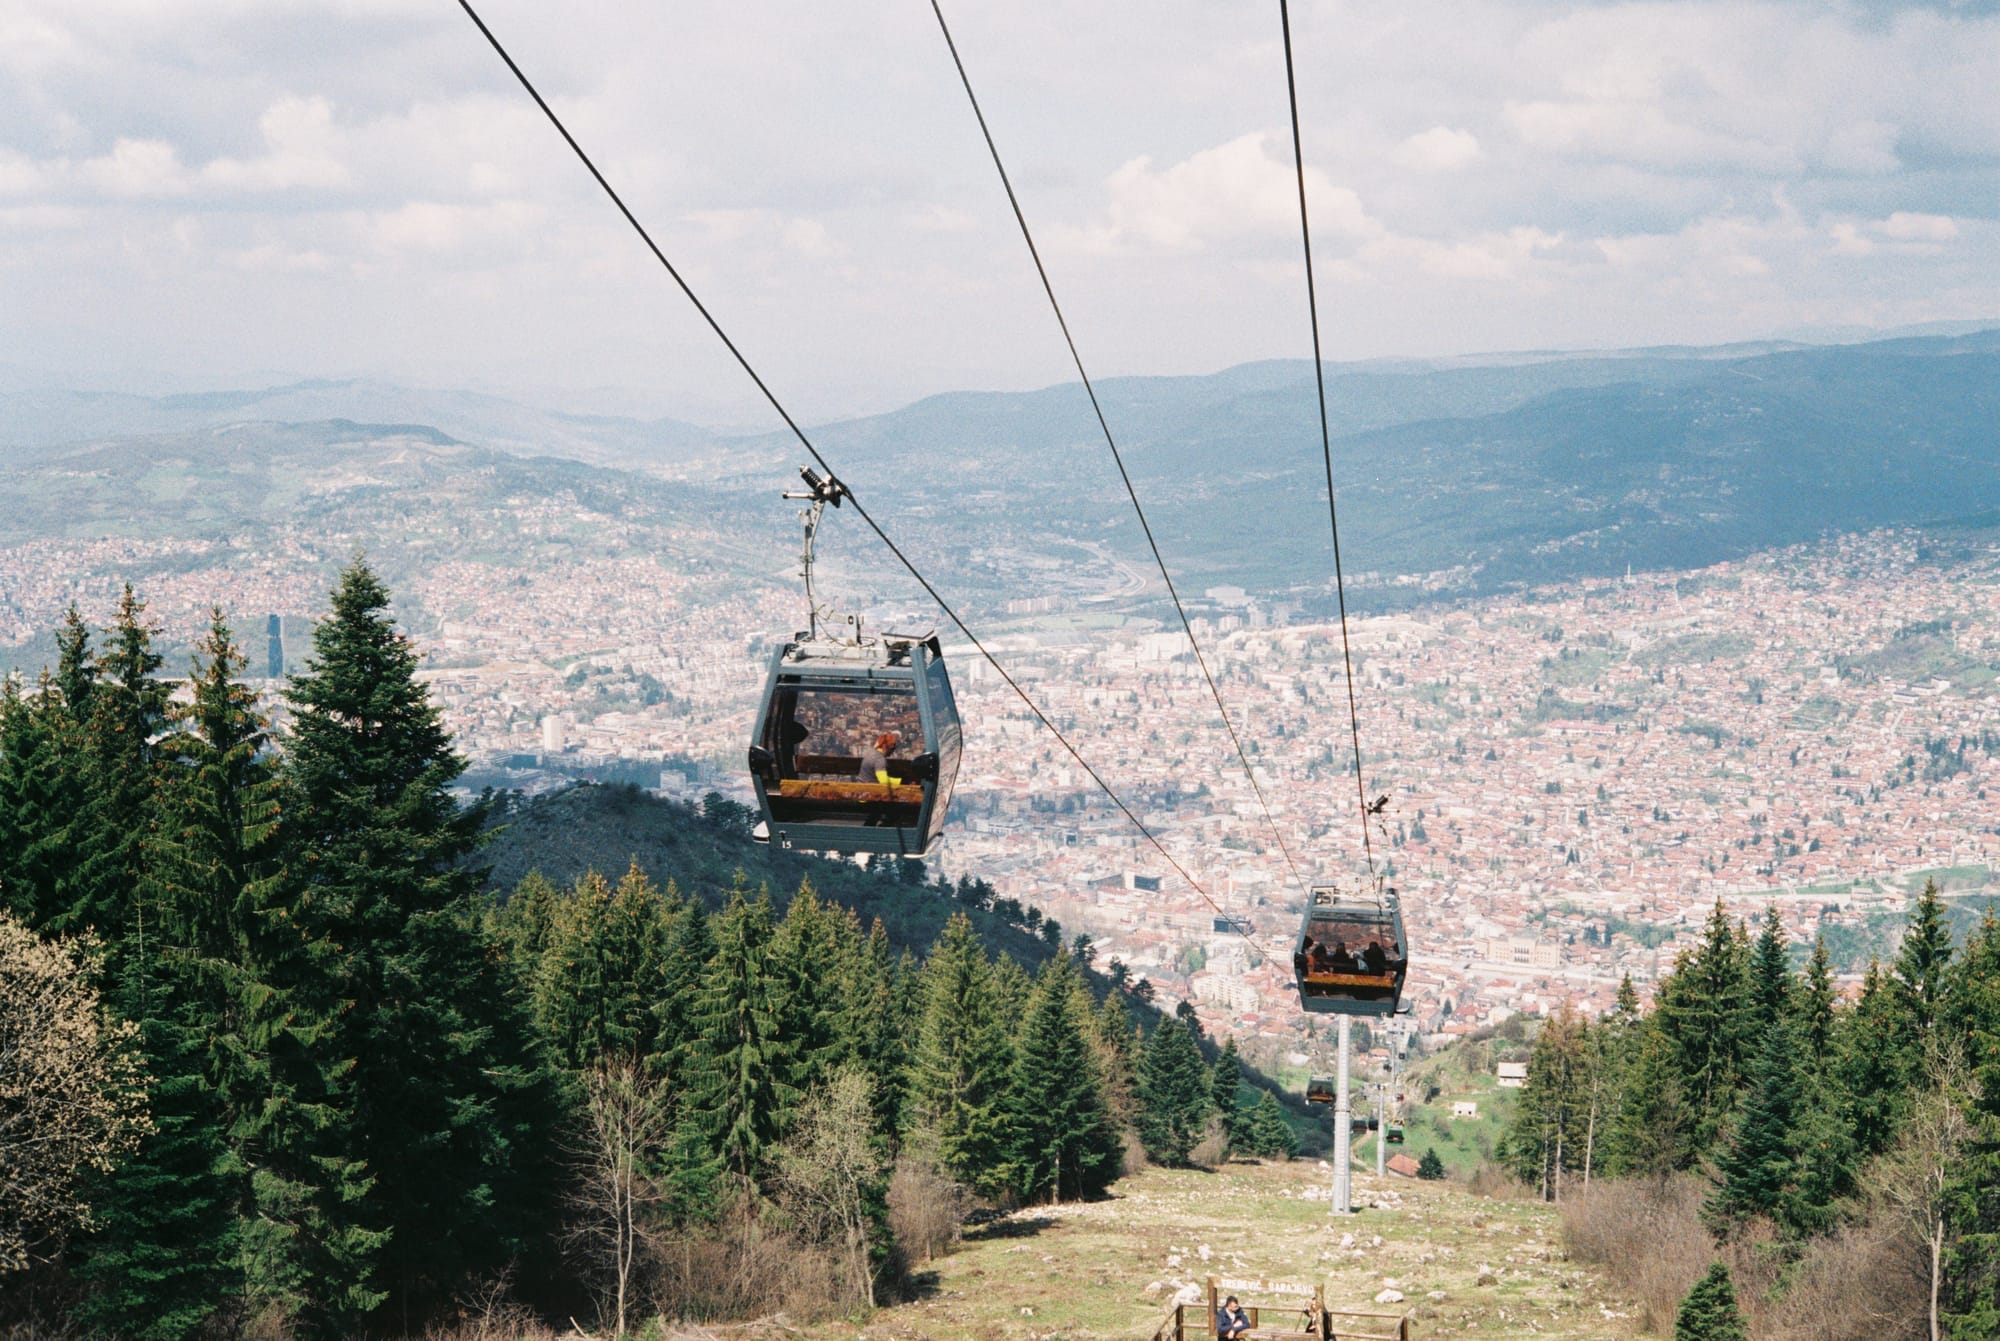 Sarajevo - The mystic city of Bosnia in the spring of 2023